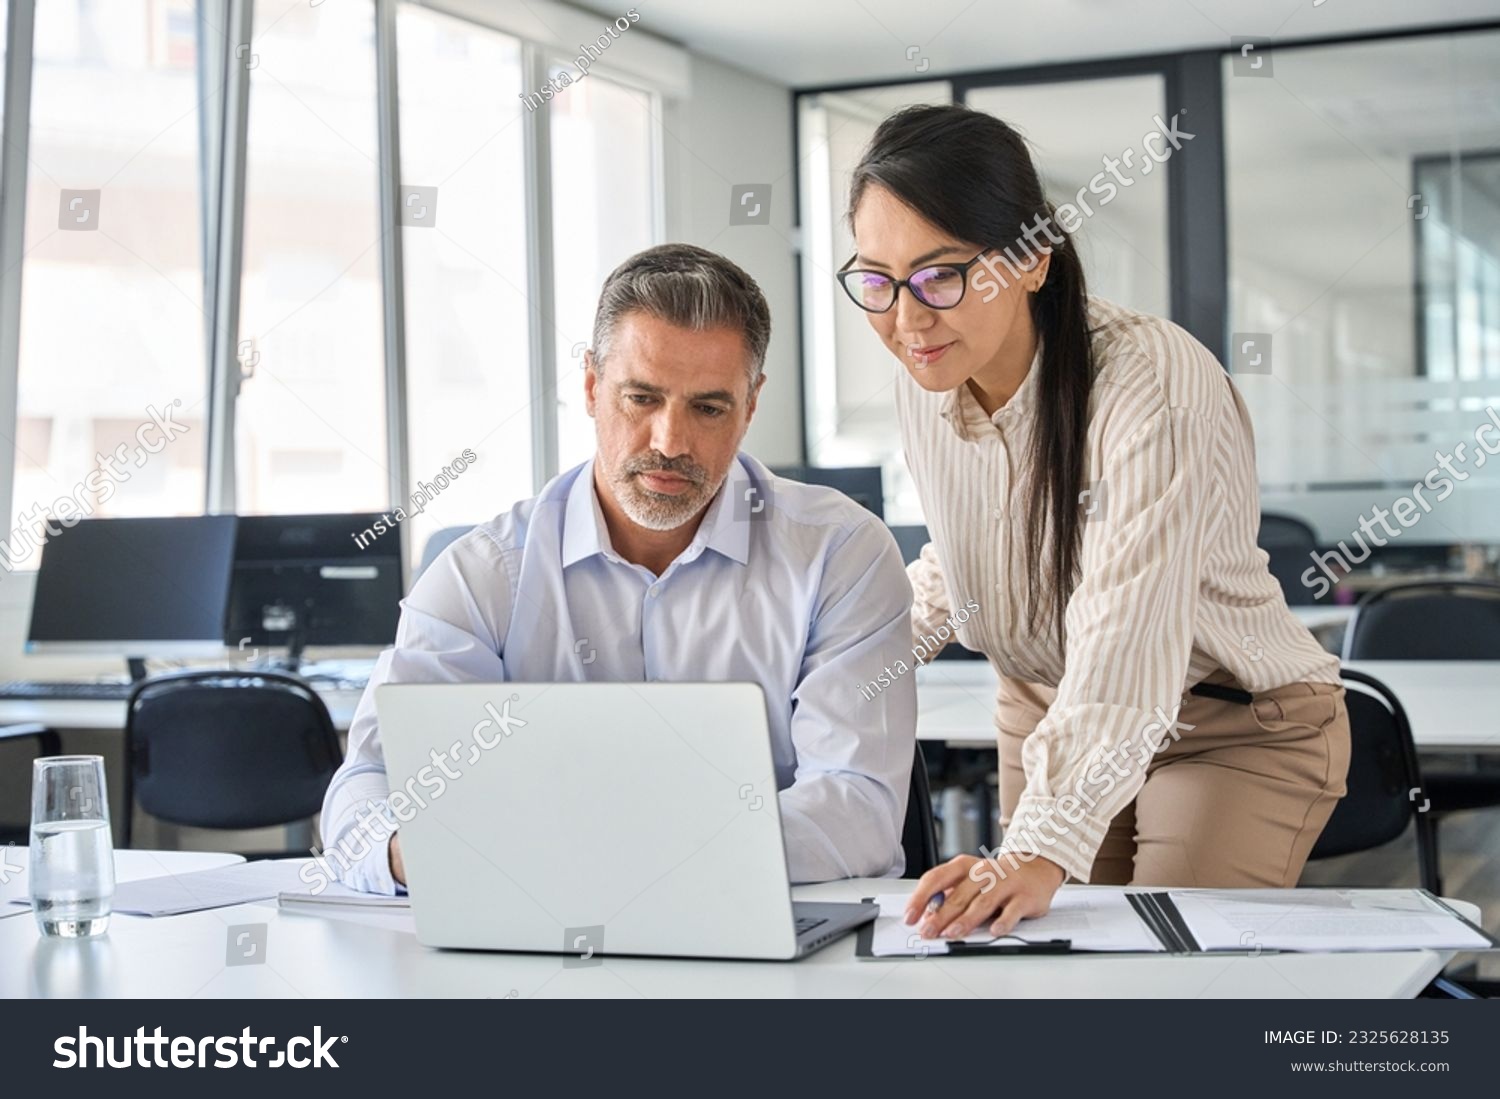 Two busy diverse professional coworkers discussing work using laptop in office. Asian employee learning online project discussing business plan with mature manager looking at computer at meeting. #2325628135